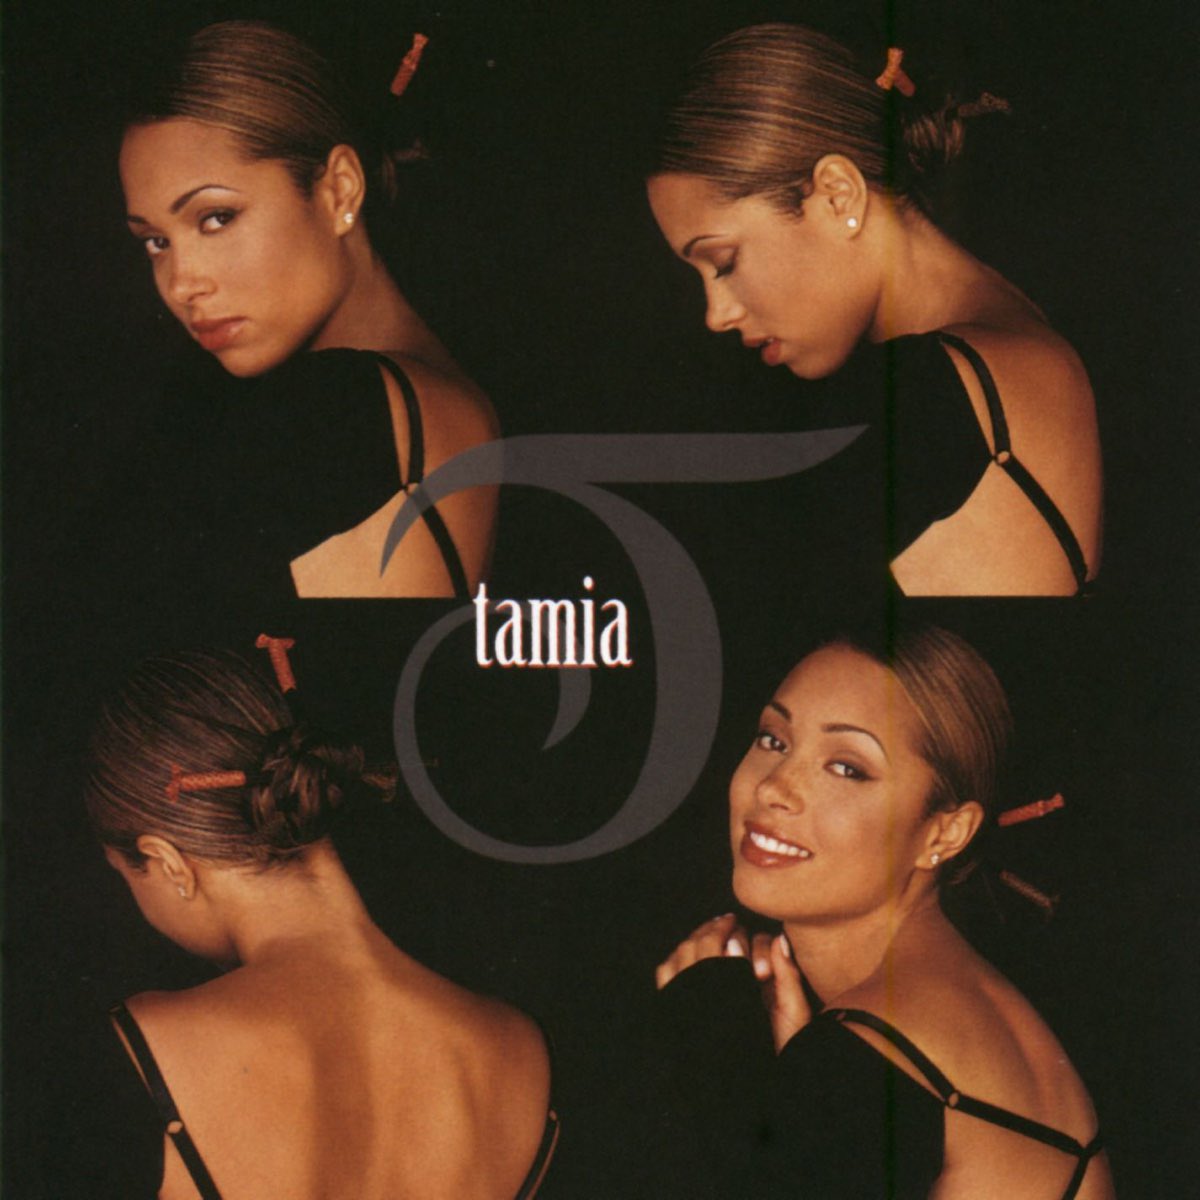 26 years ago today, Tamia released her self-titled debut album. What’s 1️⃣ of your favorite songs?